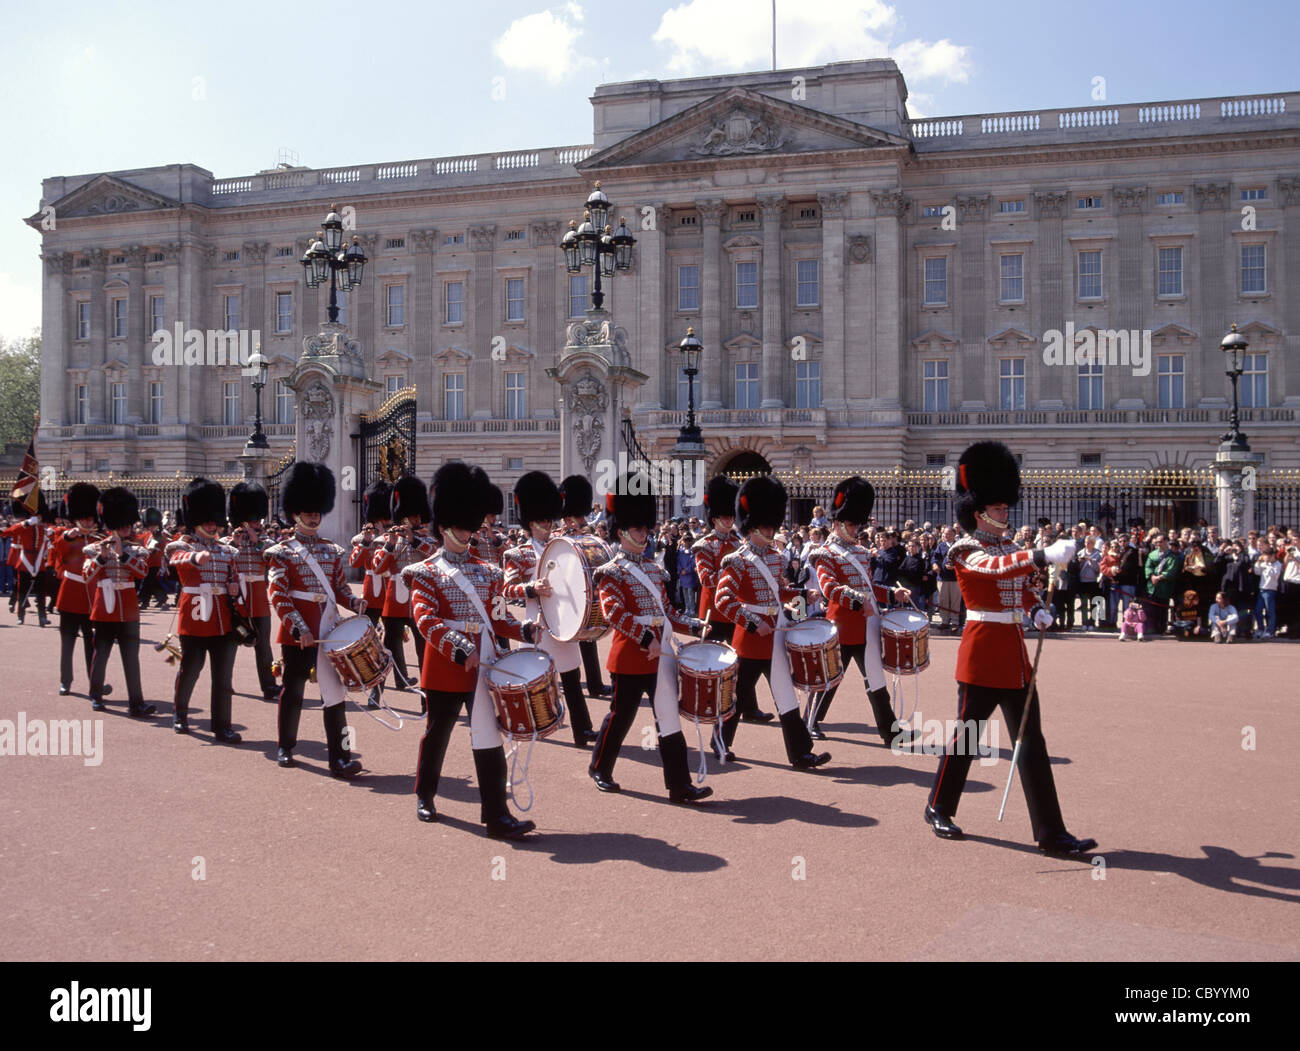 Crowds of people at changing guard ceremony British guards regiment musicians marching in ceremonial uniform at Buckingham Palace London England UK Stock Photo